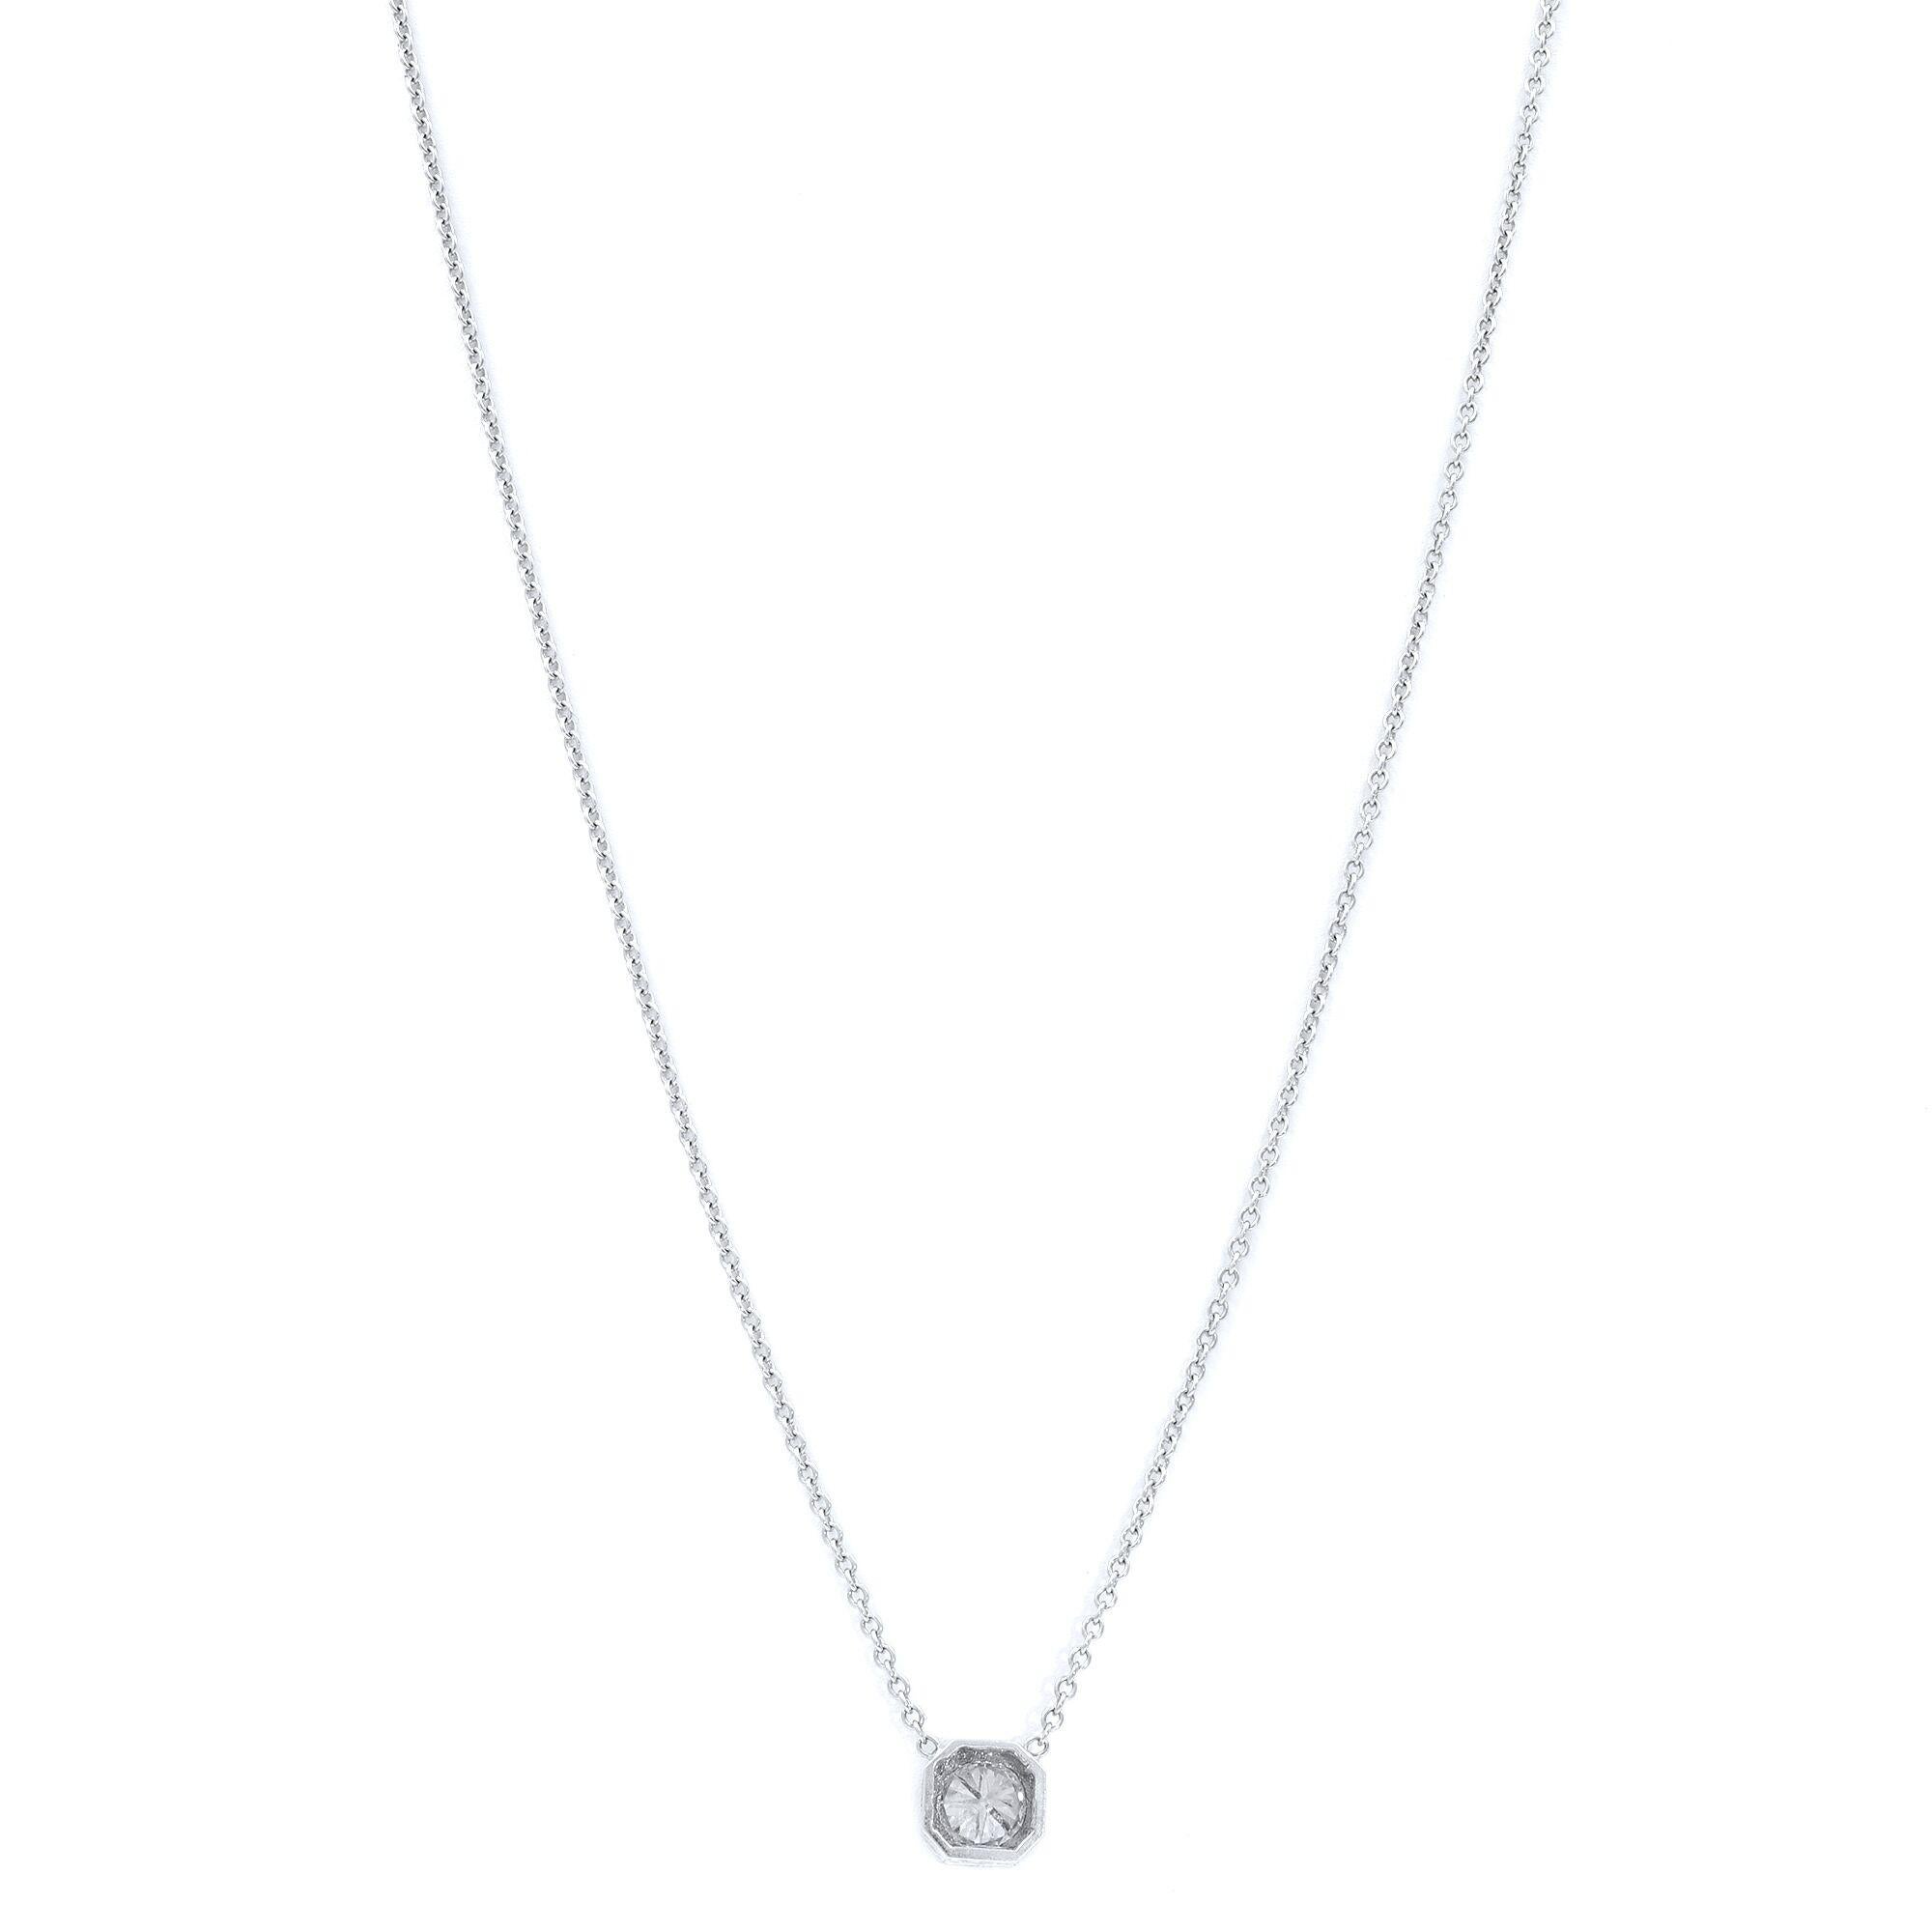 18 karat white gold diamond pendant consisting of one round brilliant cut diamond weighing 1.00 precisely and having a color and clarity grade of near colorless VS1, prong set in an engraved octagon shaped pendant.

Length: 17 inches.